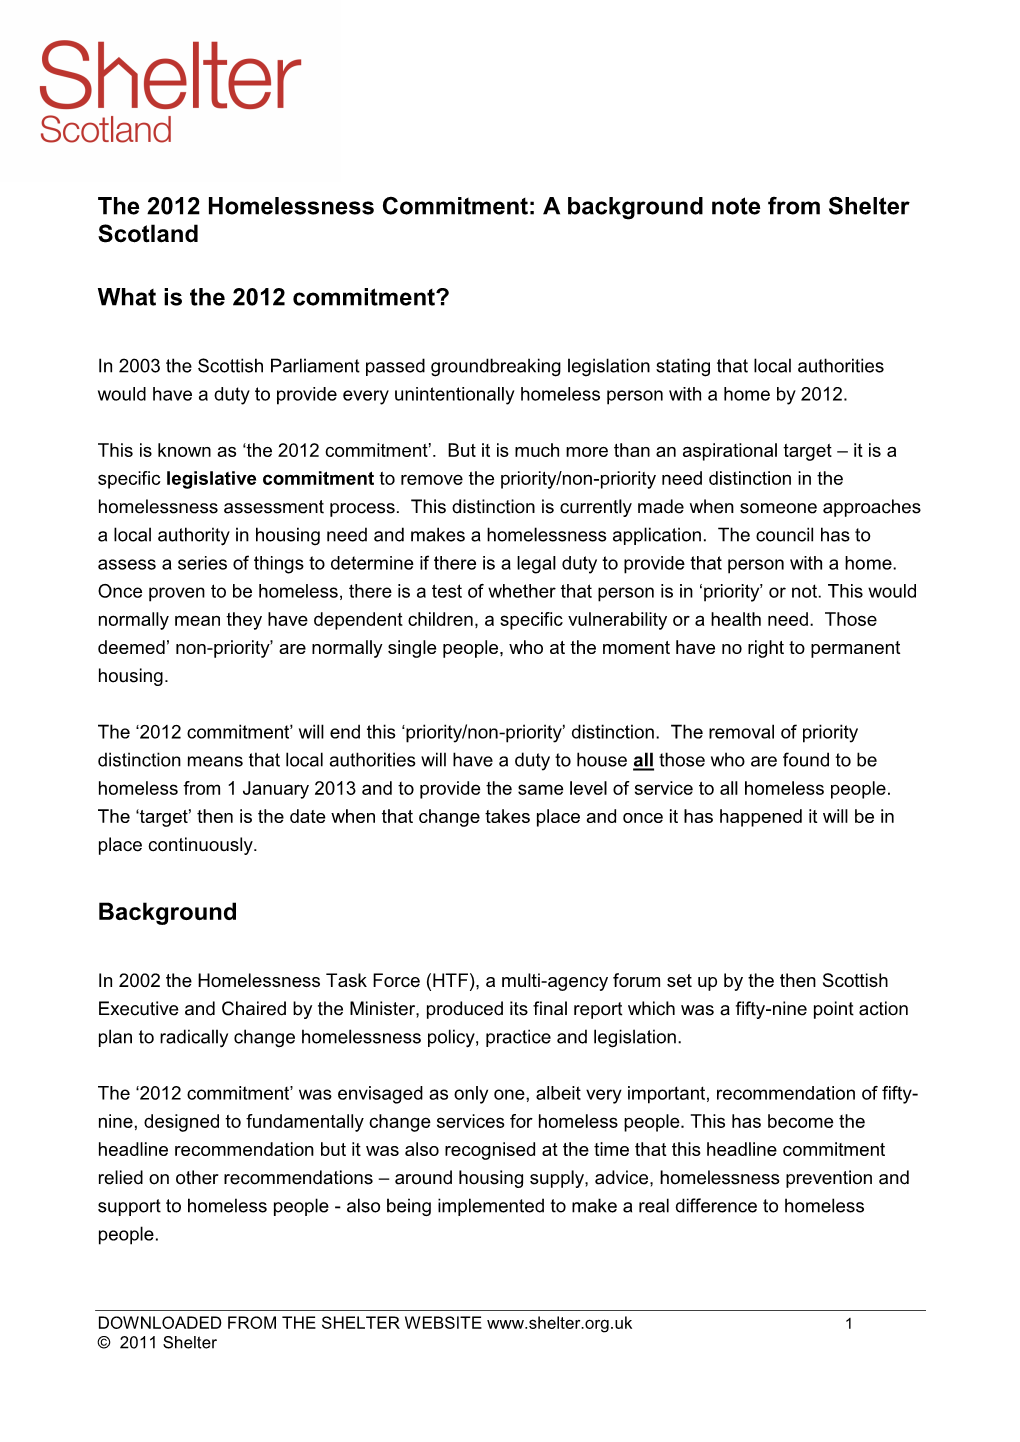 The 2012 Homelessness Commitment: a Background Note from Shelter Scotland